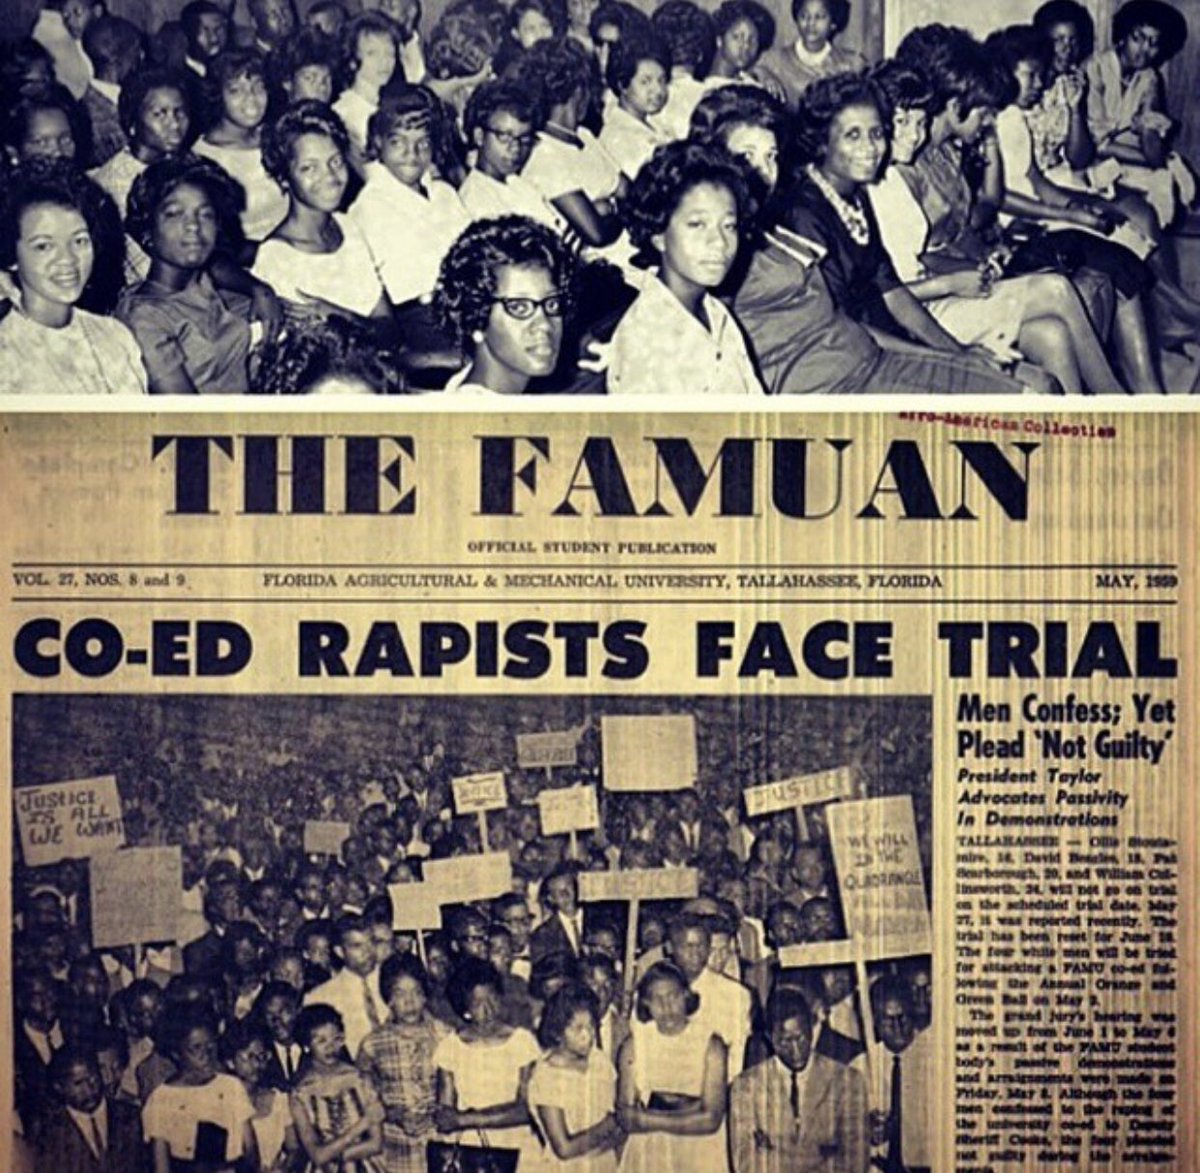 This severe of a sentencing had not occurred for white men in the South accused of raping black women previous to Owens' case. Below: The first picture is of Florida A&M students sitting in the courtroom during Betty's trial.